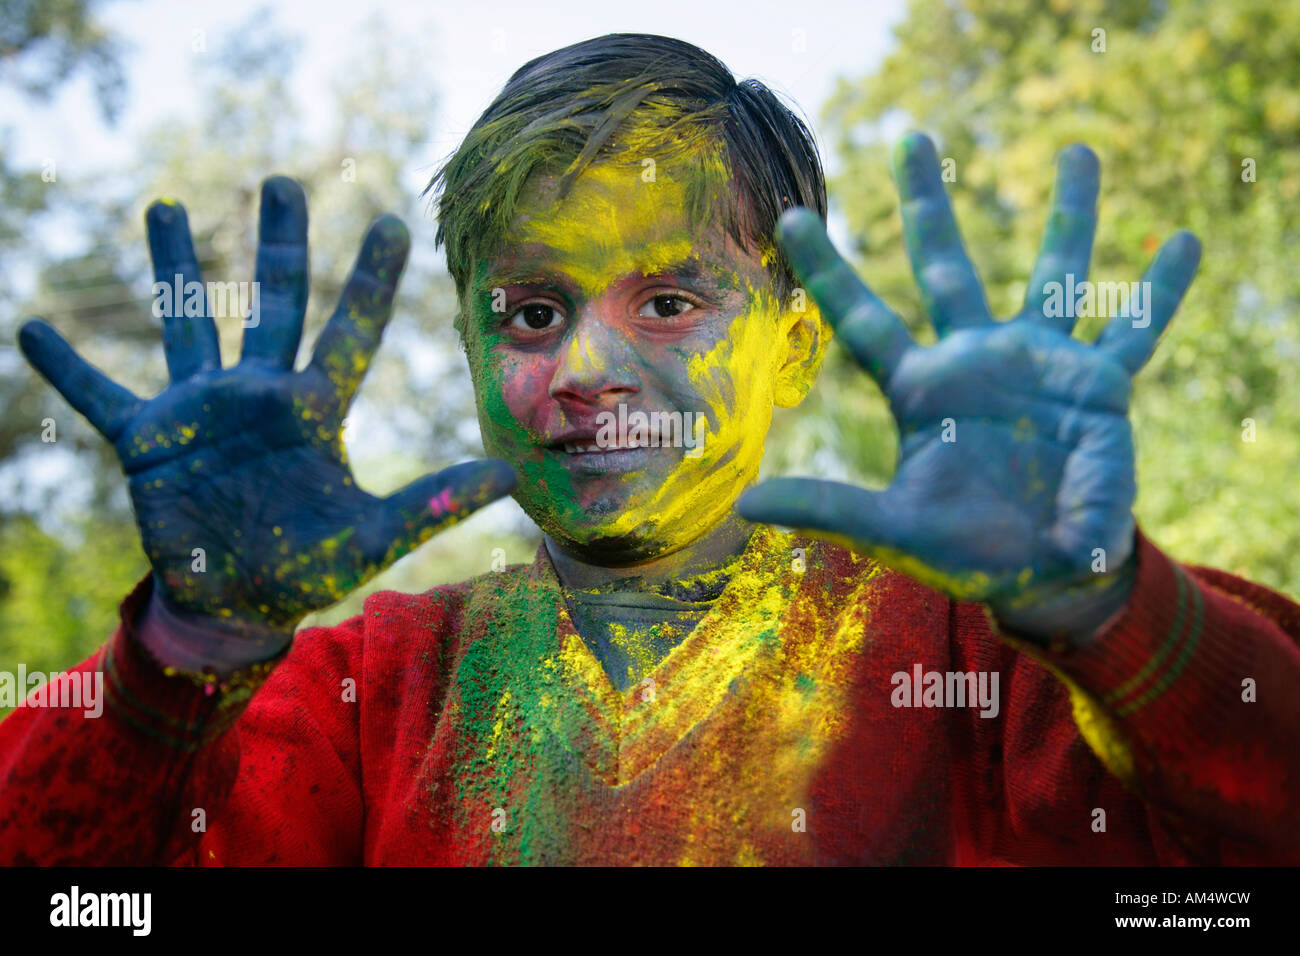 A smiling young boy shows off his colored hands and face during festival of Holi in India. Stock Photo